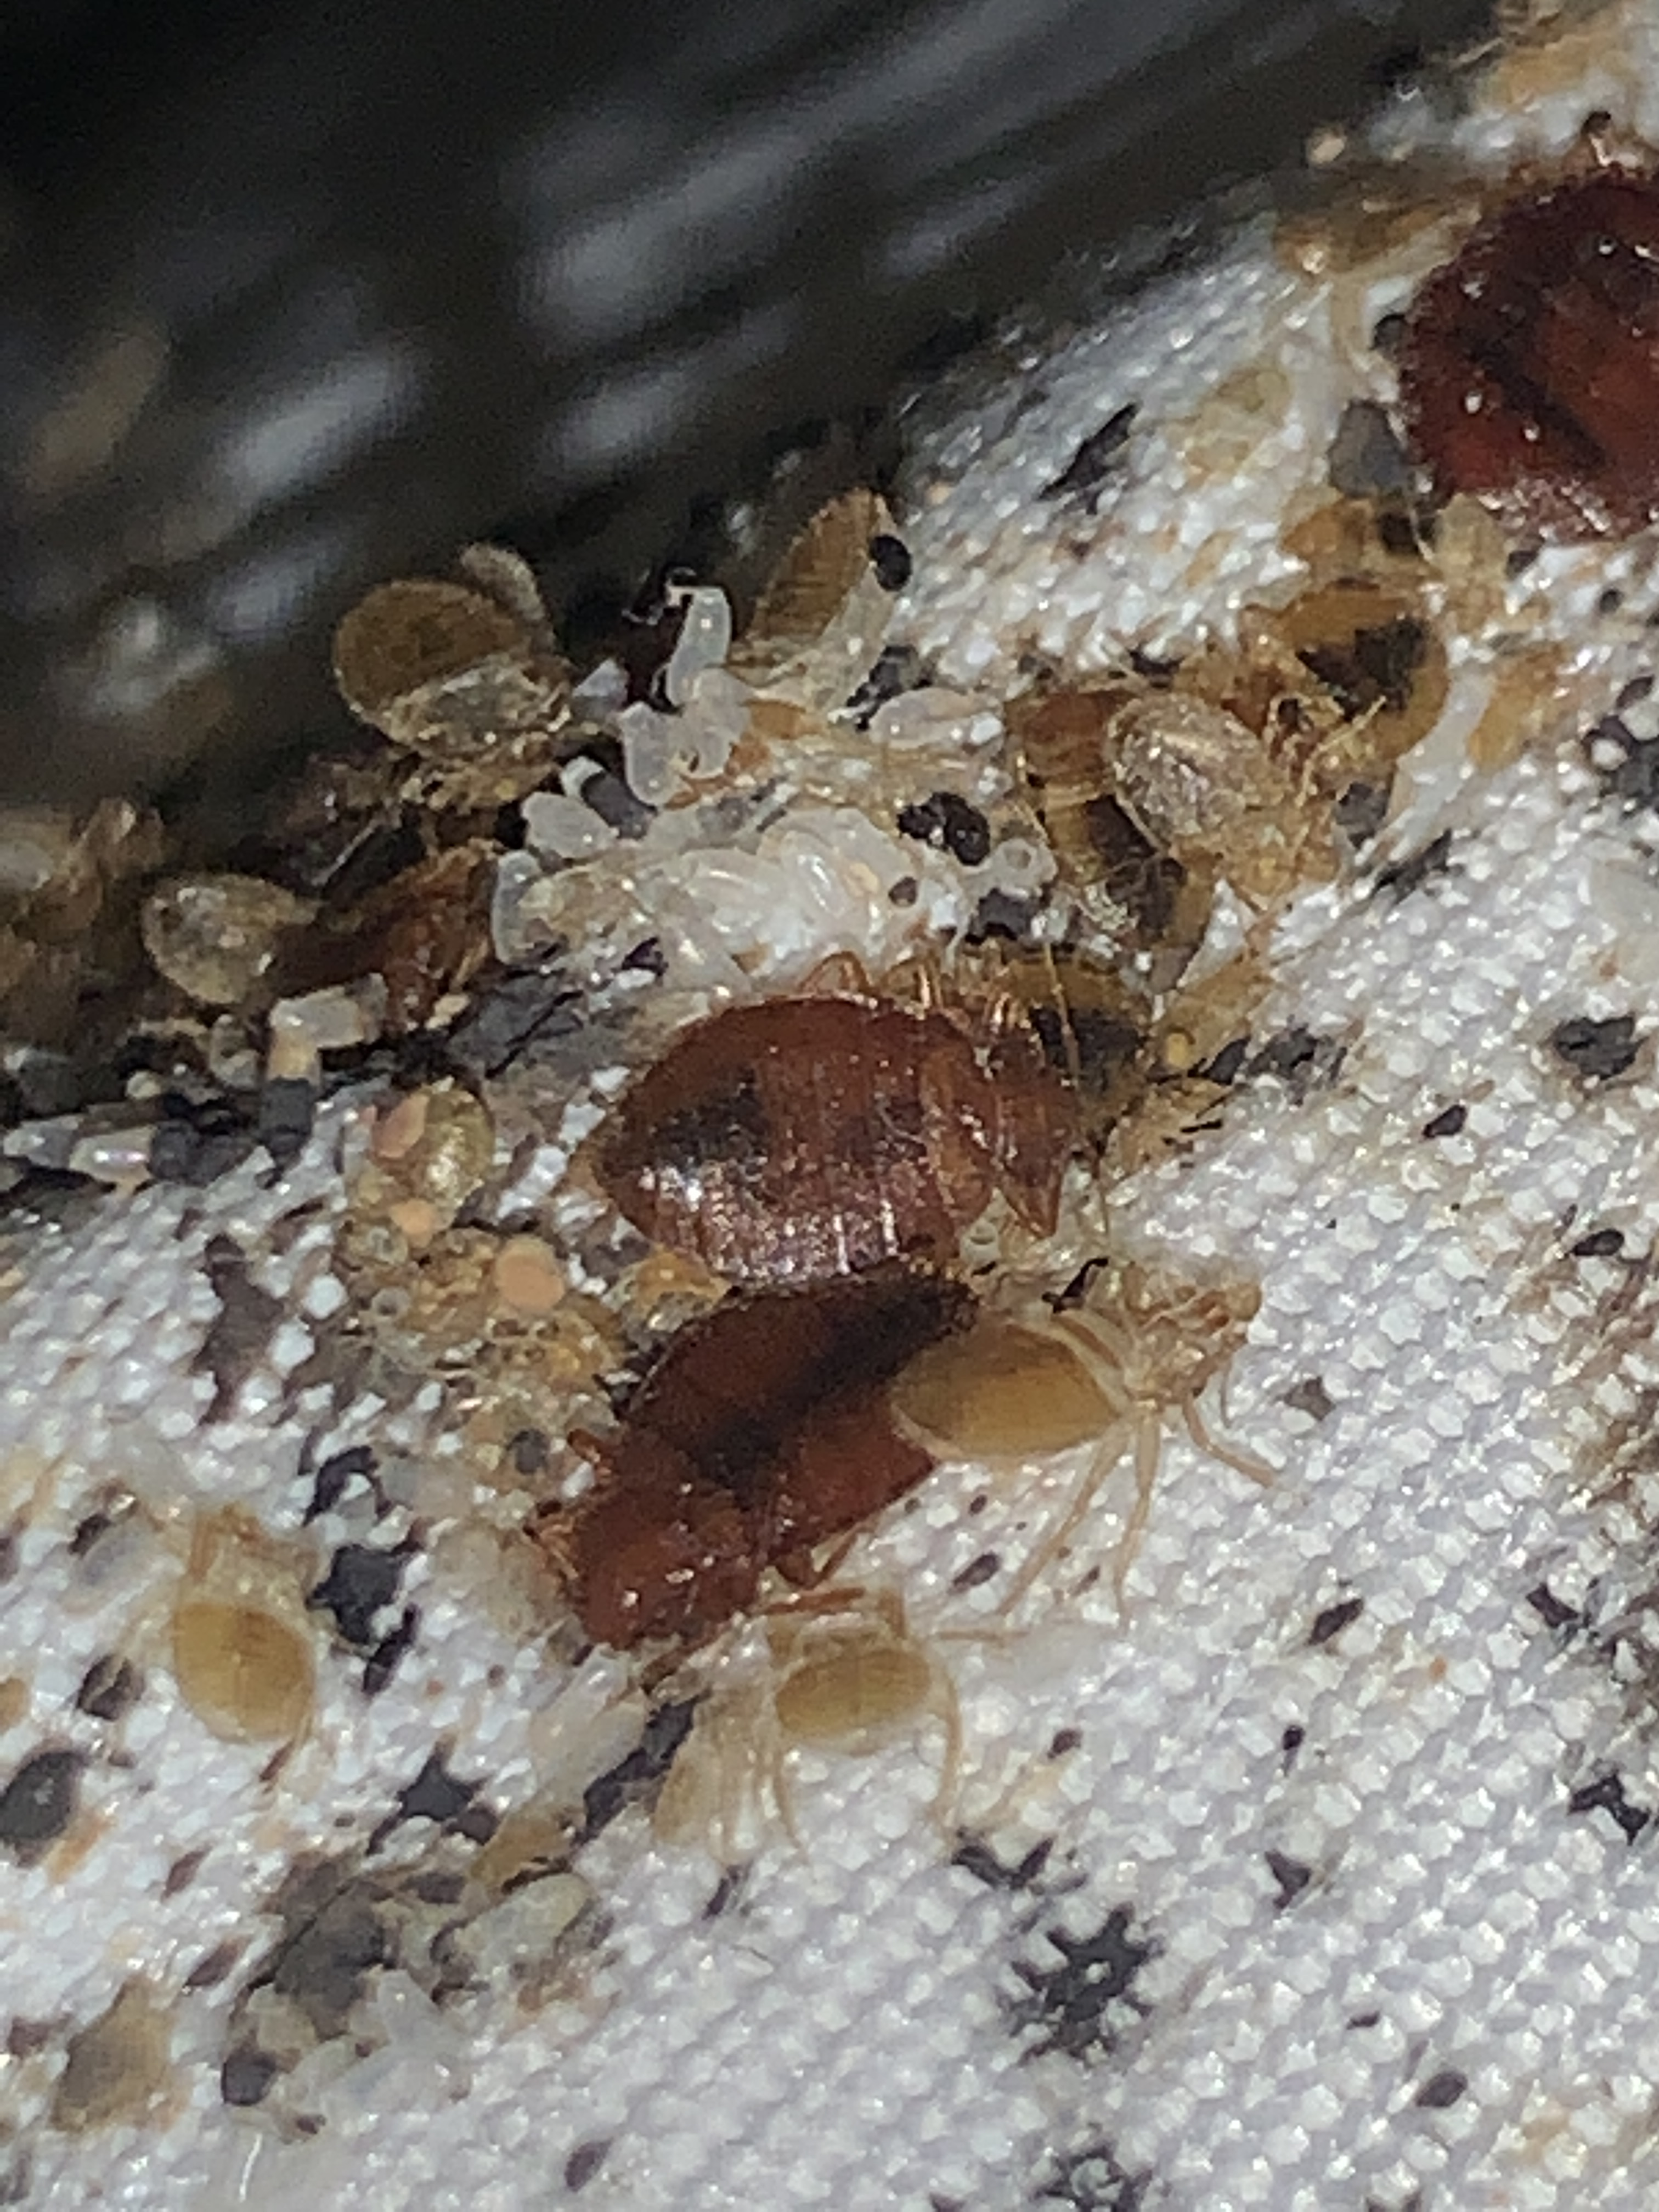 Heat Treatment for Bed Bugs